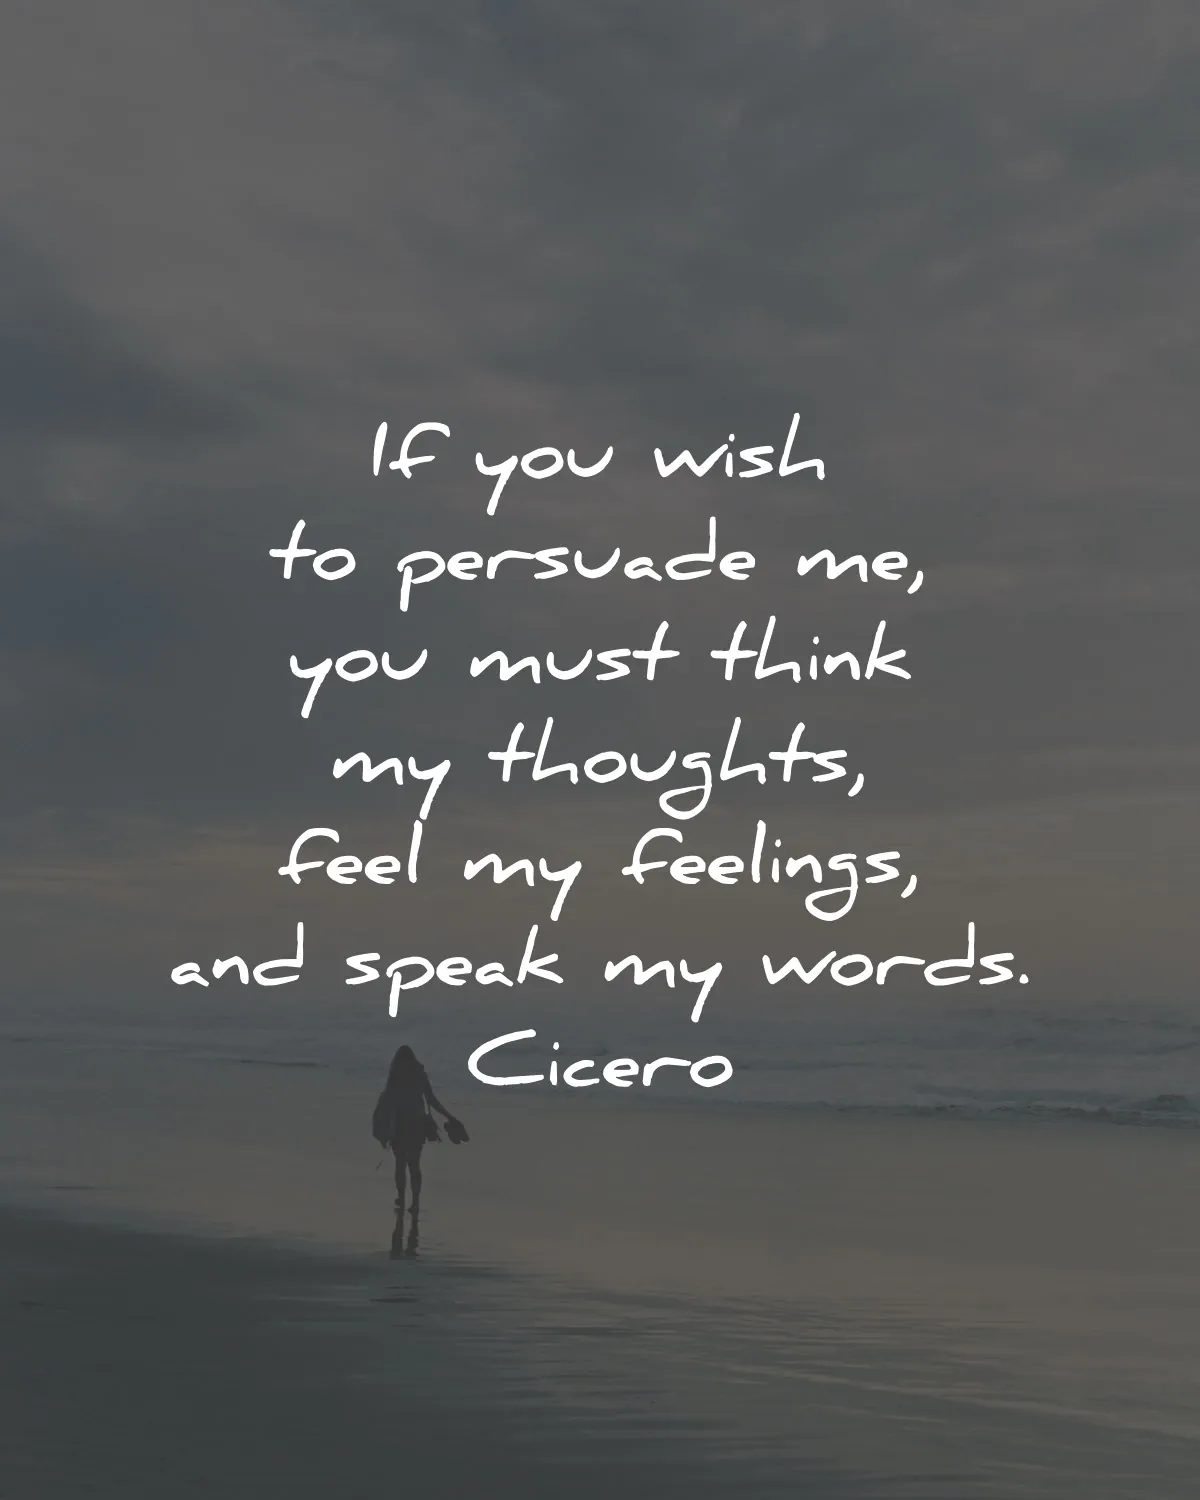 cicero quotes wish persuade think thoughts words wisdom